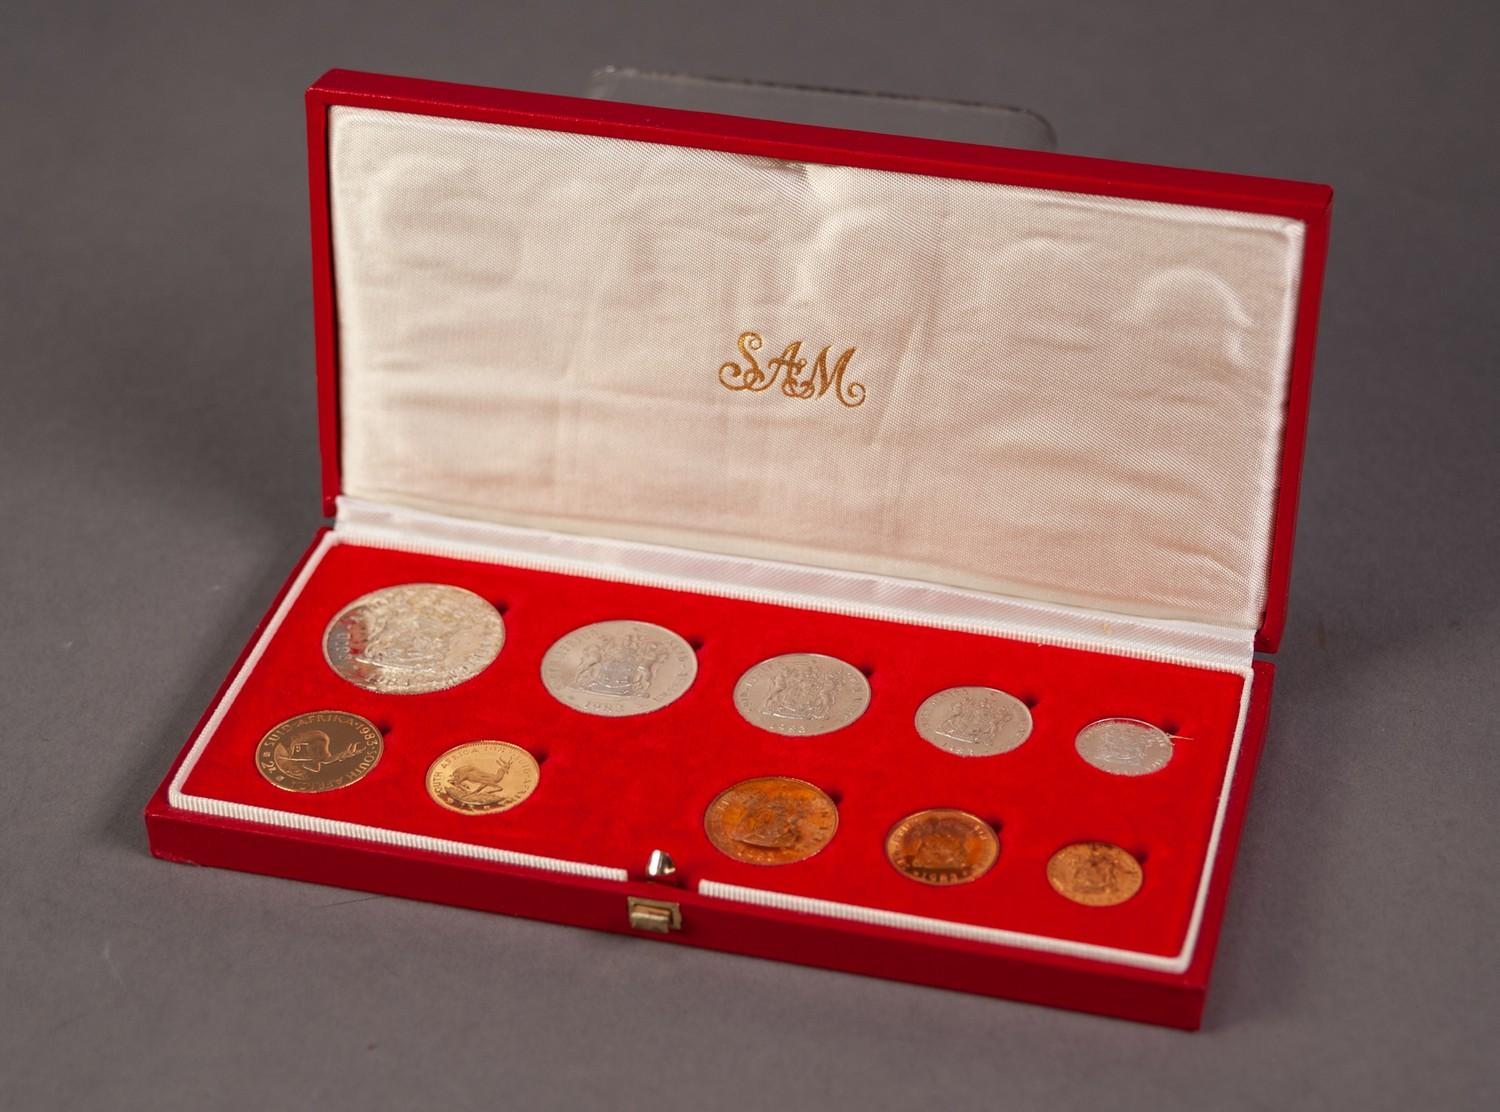 1983 SOUTH AFRICAN TEN COIN SET INCLUDING A GOLD 2 RAND AND A GOLD 1 RAND COIN, both mint, 12.1g, in